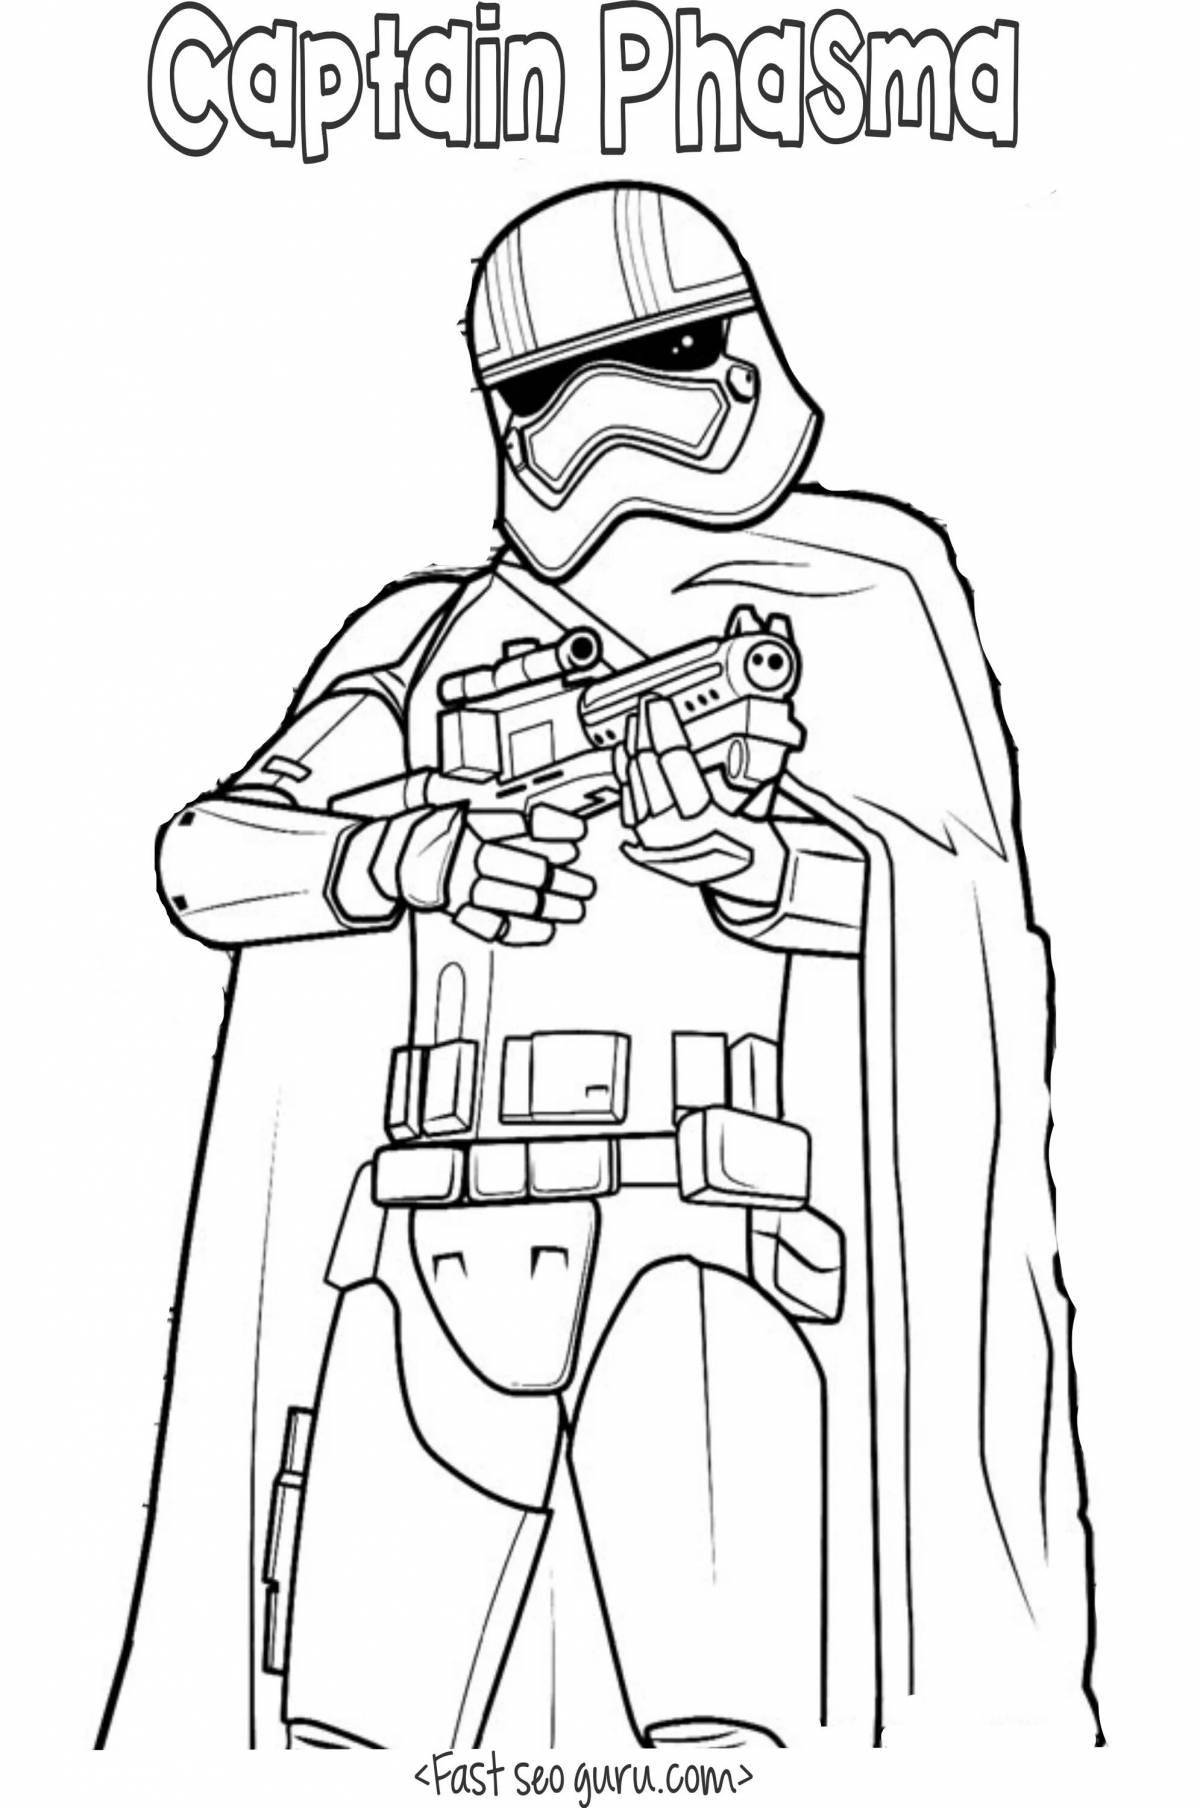 Star wars stormtrooper coloring page